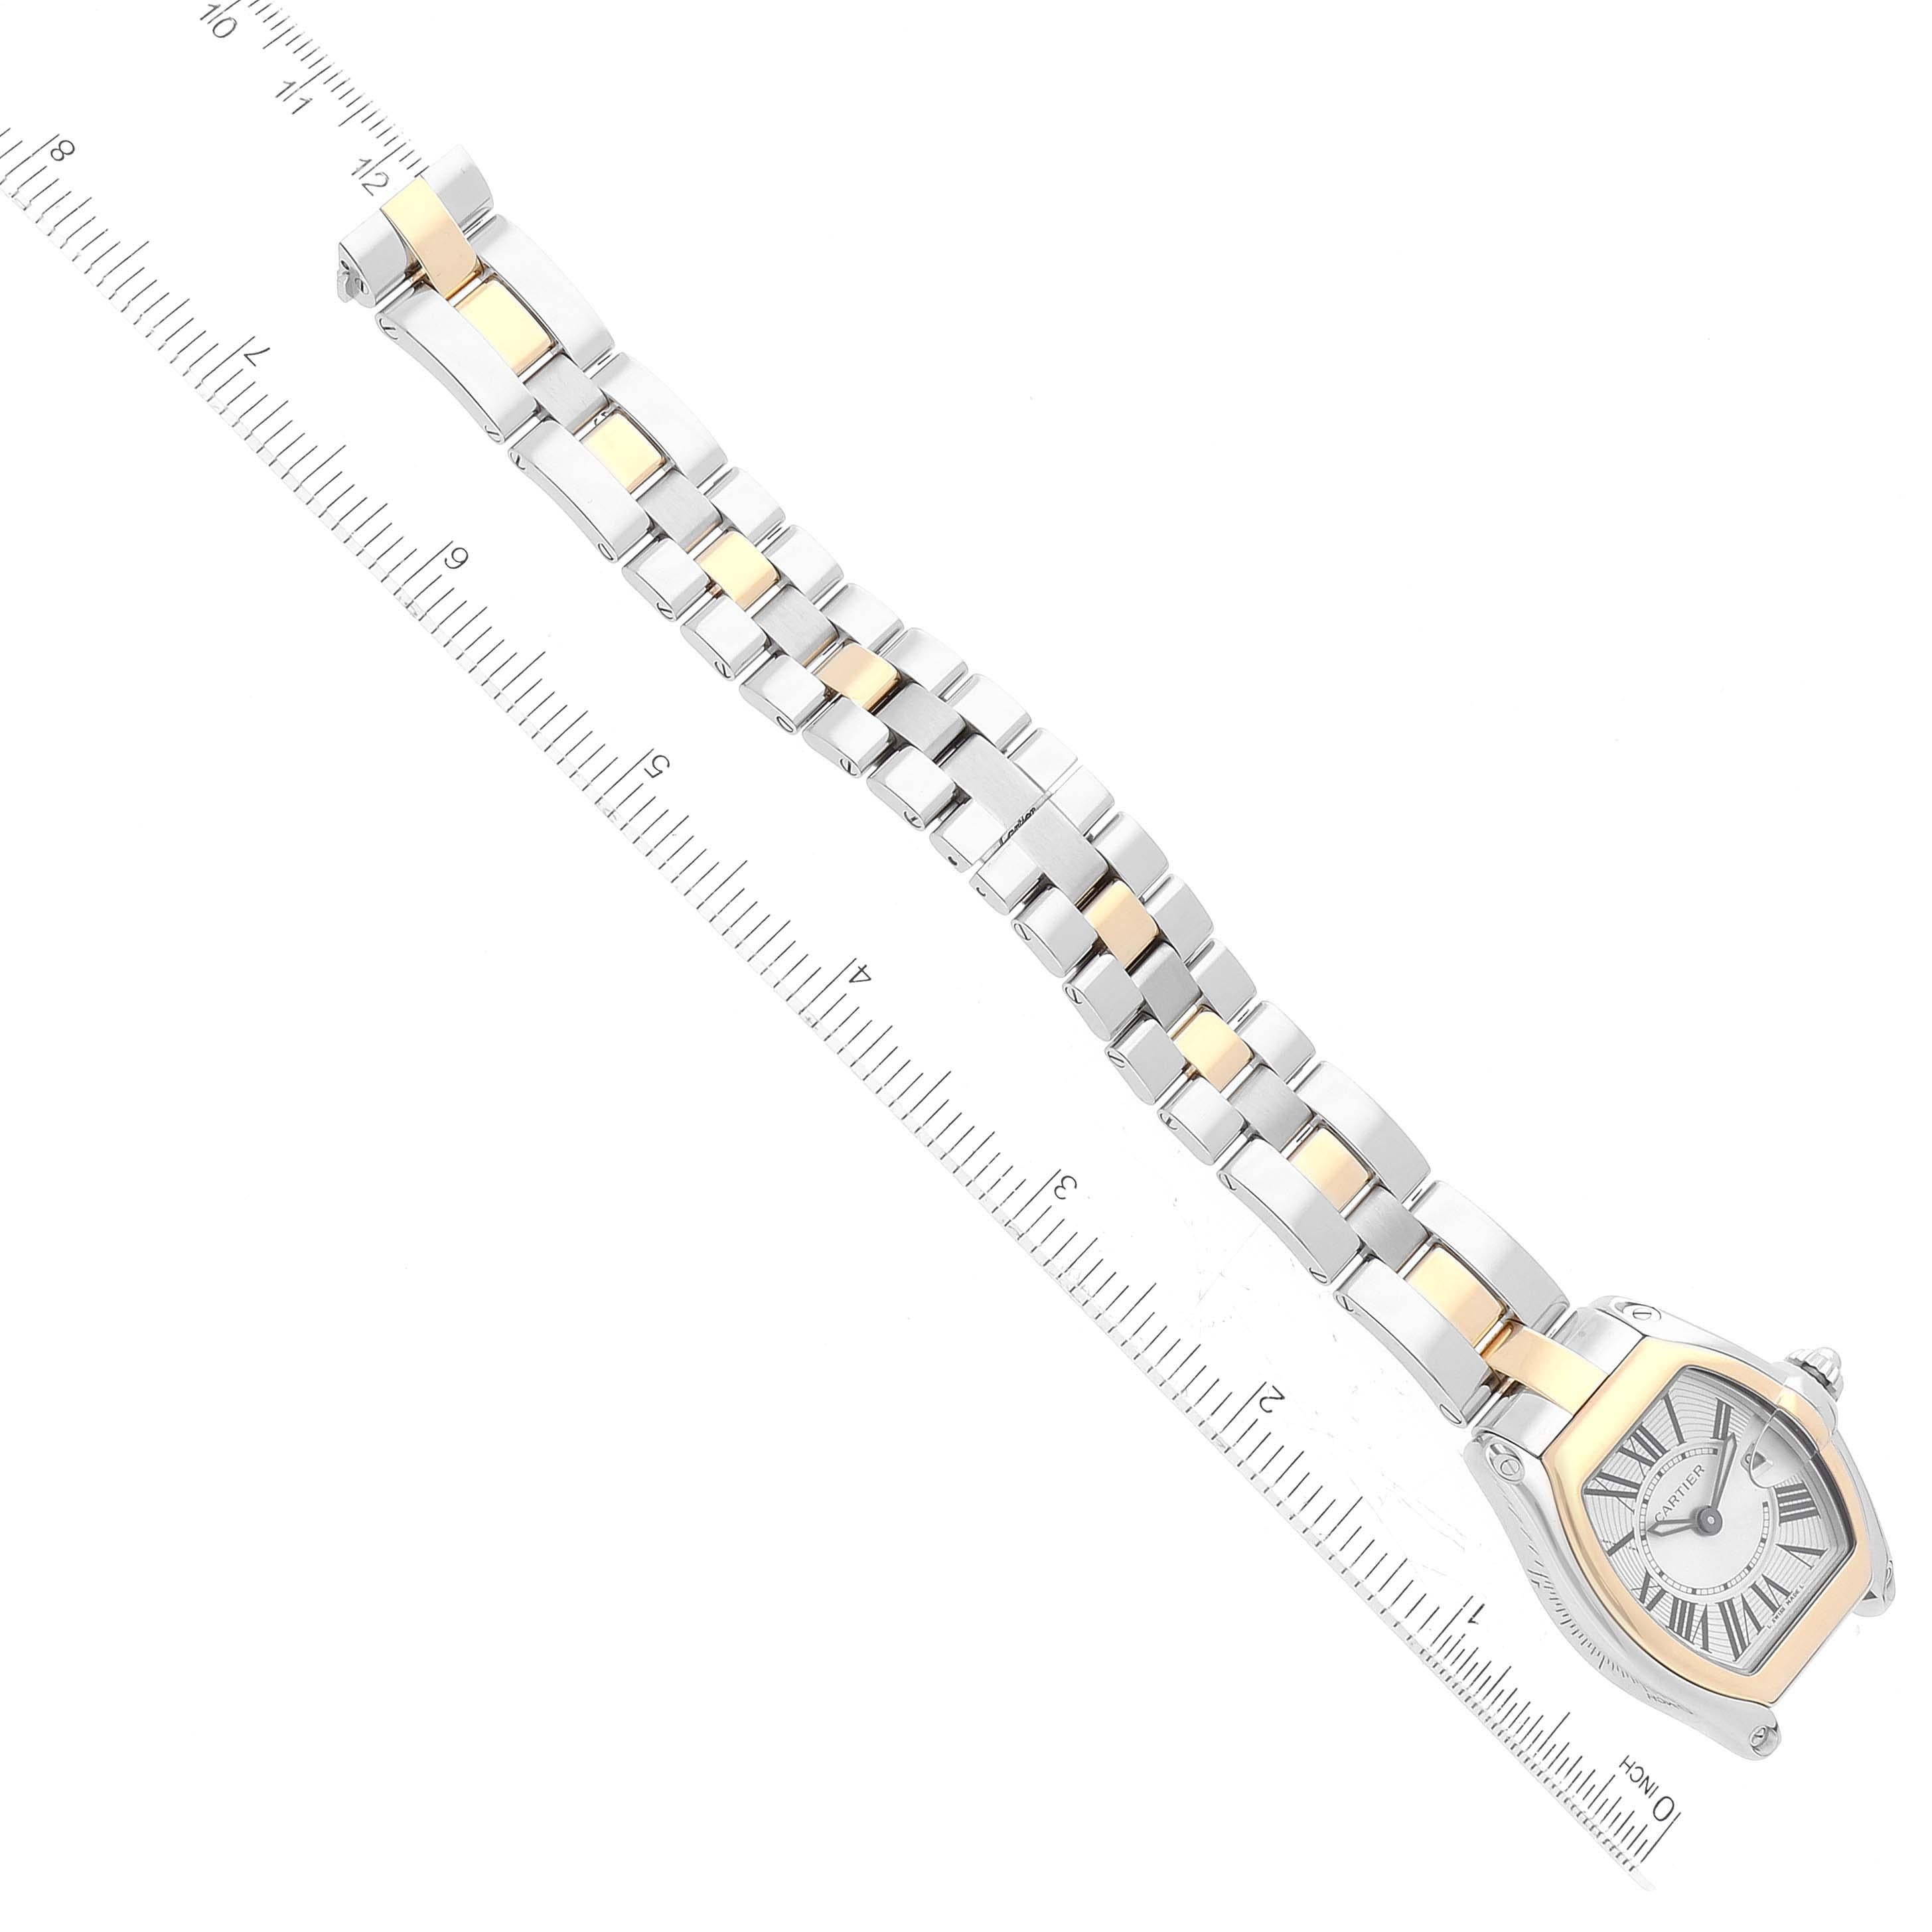 Cartier Roadster Steel Yellow Gold Ladies Watch W62026Y4 For Sale 4